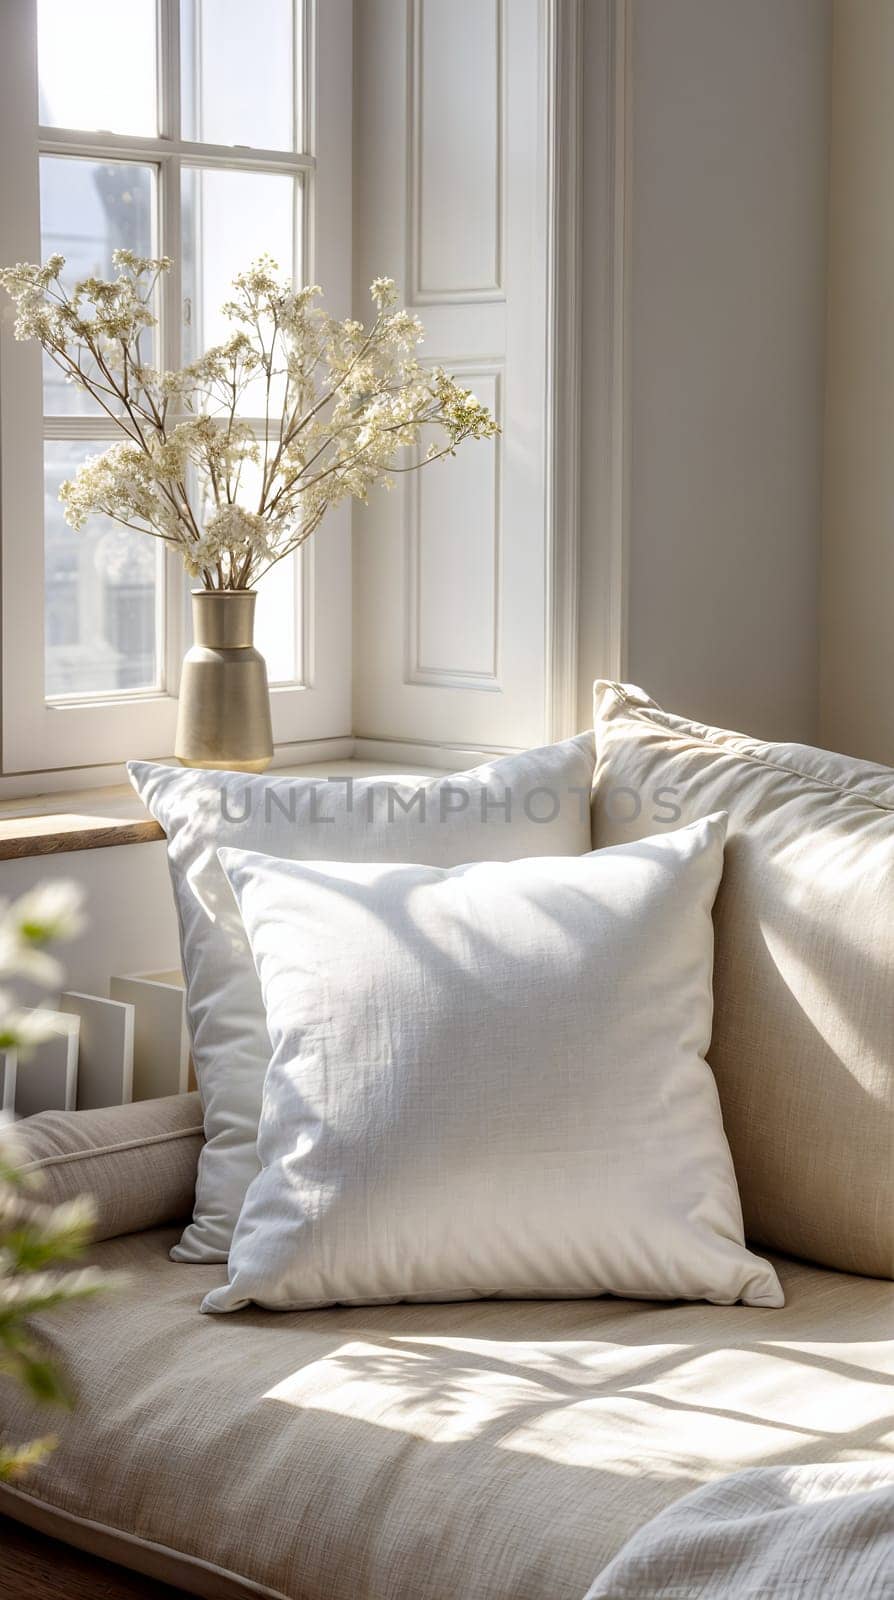 Warm sunlight bathes a comfortable nook, featuring plush cushions and a vase of delicate flowers, ideal for branding mockups